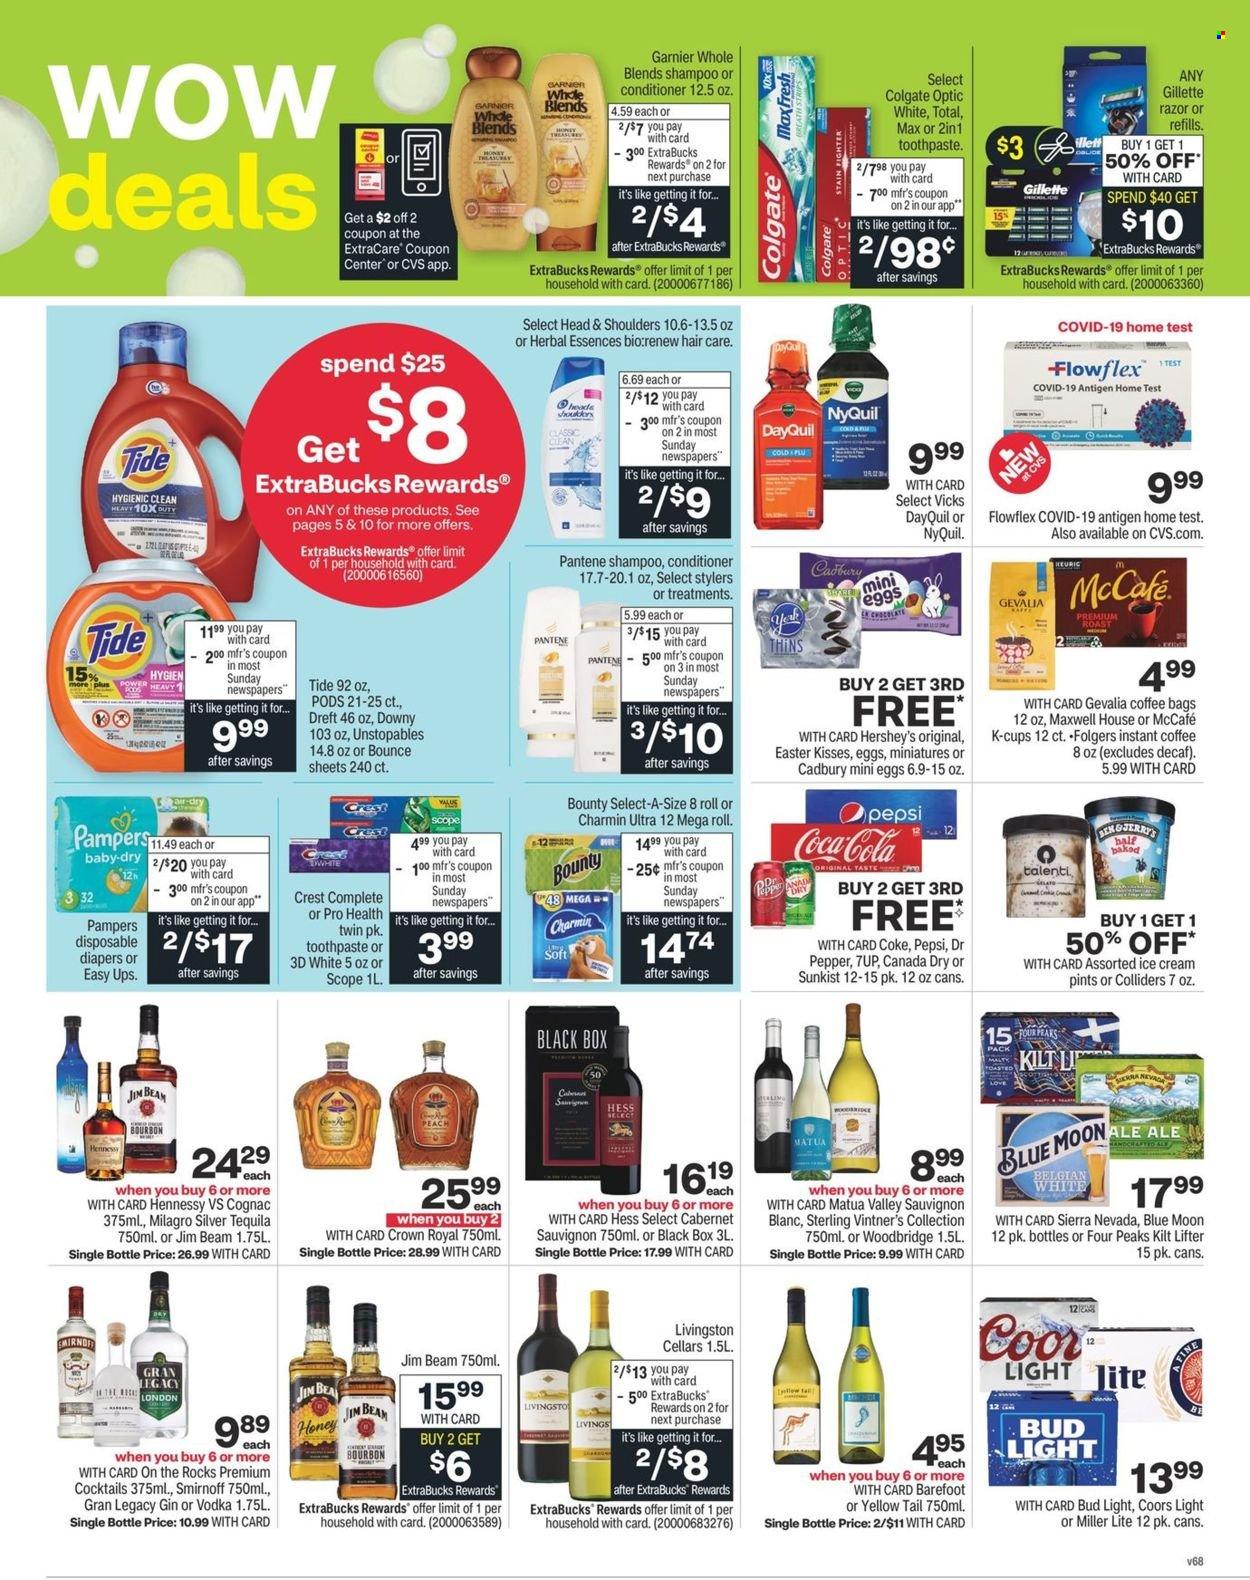 thumbnail - CVS Pharmacy Flyer - 01/30/2022 - 02/05/2022 - Sales products - ice cream, Hershey's, Talenti Gelato, Bounty, Cadbury, Thins, Canada Dry, Coca-Cola, Pepsi, Dr. Pepper, 7UP, Maxwell House, instant coffee, Folgers, coffee capsules, McCafe, K-Cups, Gevalia, Cabernet Sauvignon, red wine, white wine, wine, Sauvignon Blanc, Woodbridge, bourbon, cognac, gin, Smirnoff, tequila, vodka, Hennessy, Jim Beam, Pampers, nappies, Charmin, Tide, Unstopables, Bounce, Downy Laundry, shampoo, Colgate, toothpaste, Crest, Garnier, conditioner, Head & Shoulders, Pantene, Herbal Essences, Gillette, razor, Vicks, DayQuil, NyQuil, beer, Bud Light, Miller Lite, Coors, Blue Moon. Page 2.